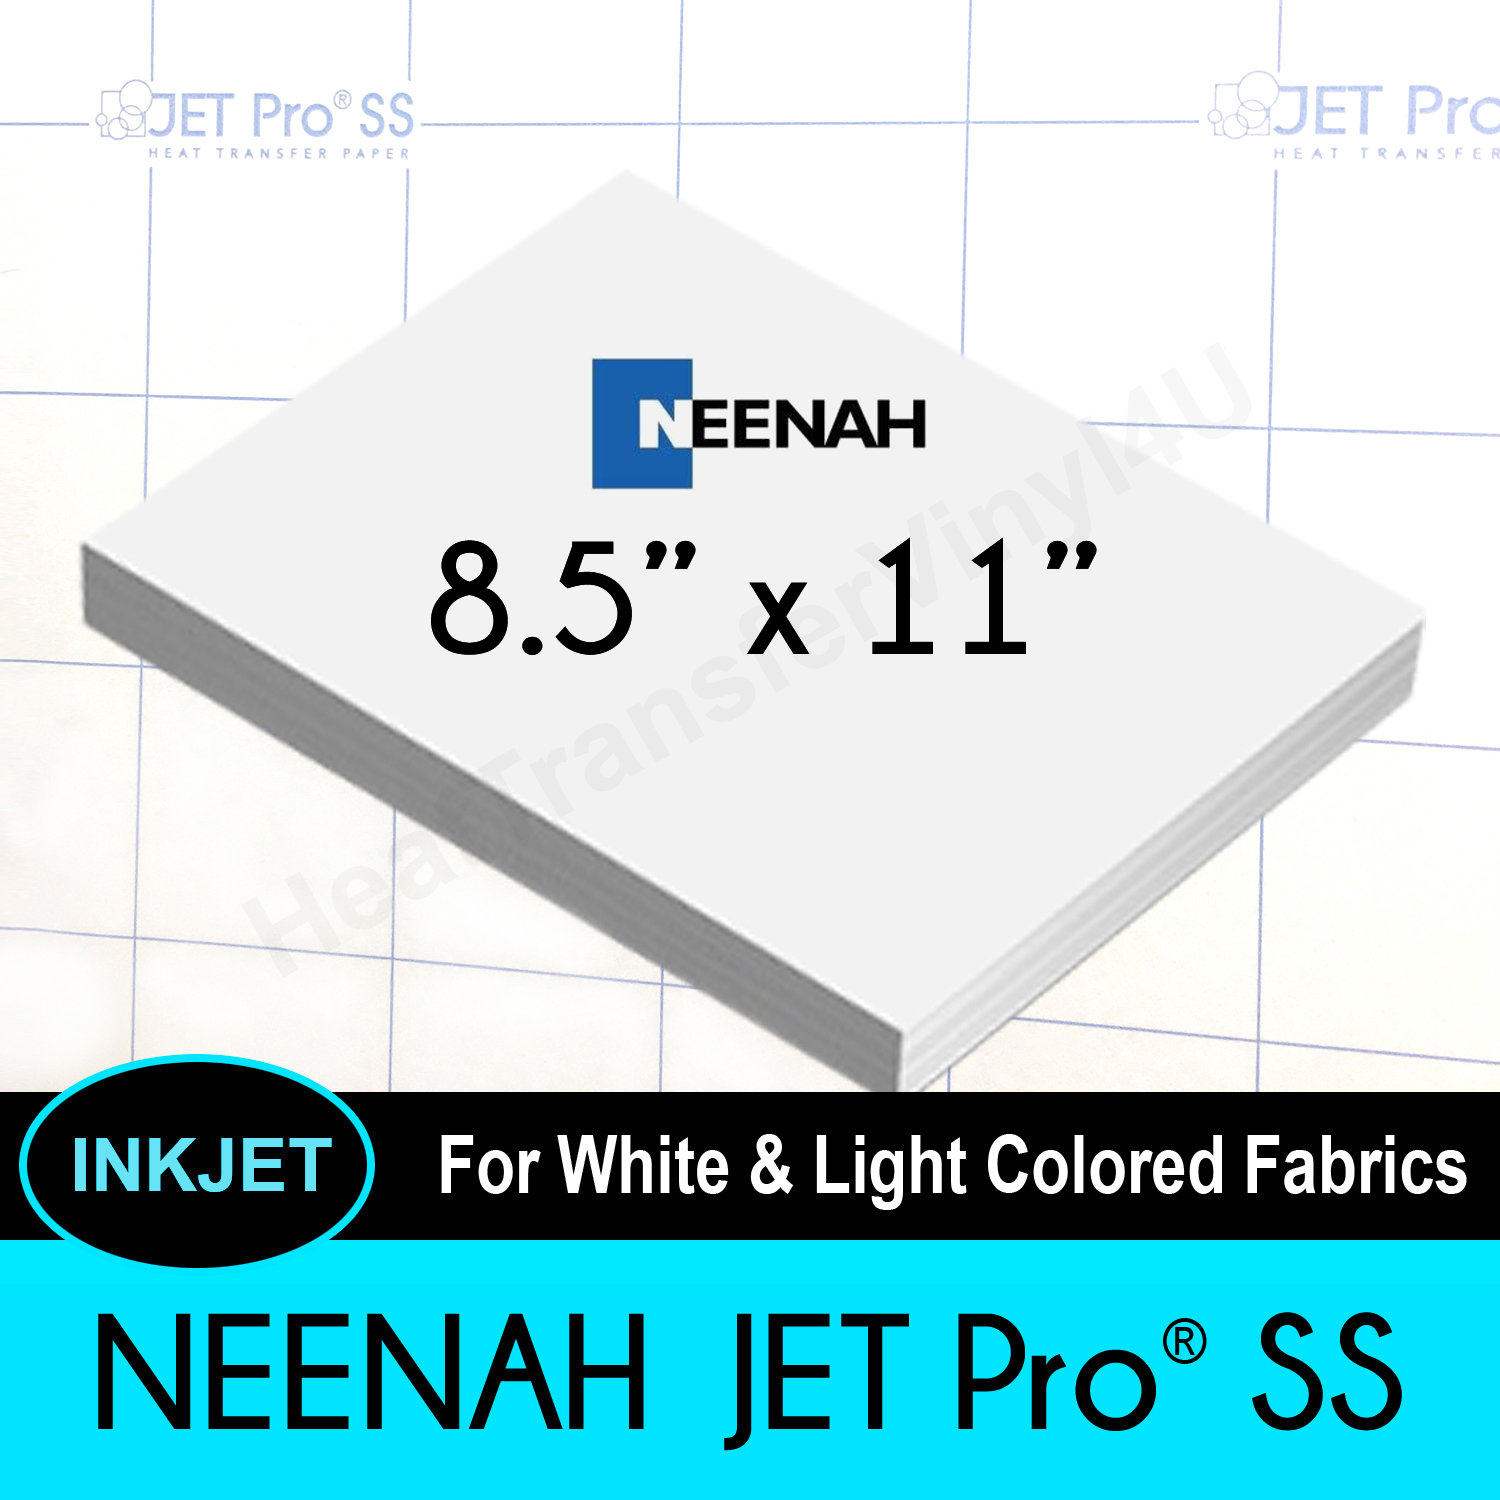 Heat Transfer Paper Sample Pack 5 Sheets of 3G Jet Opaque for Dark Colors &  5 Sheets of Jetpro for Light Colors 